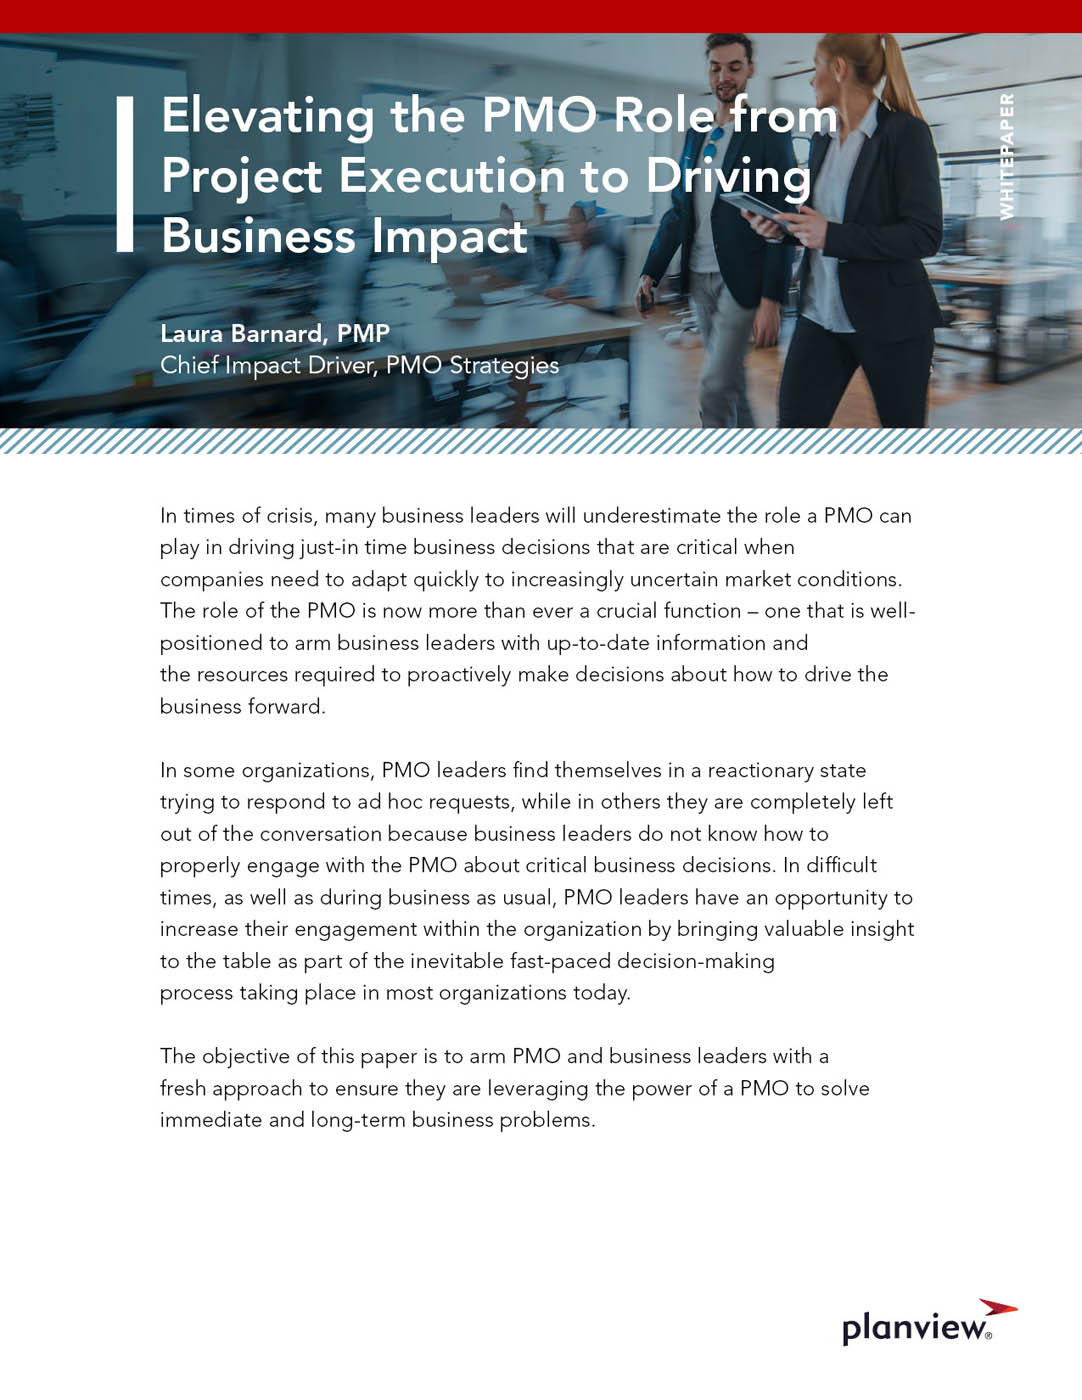 Elevating the PMO Role from Project Execution to Driving Business Impact